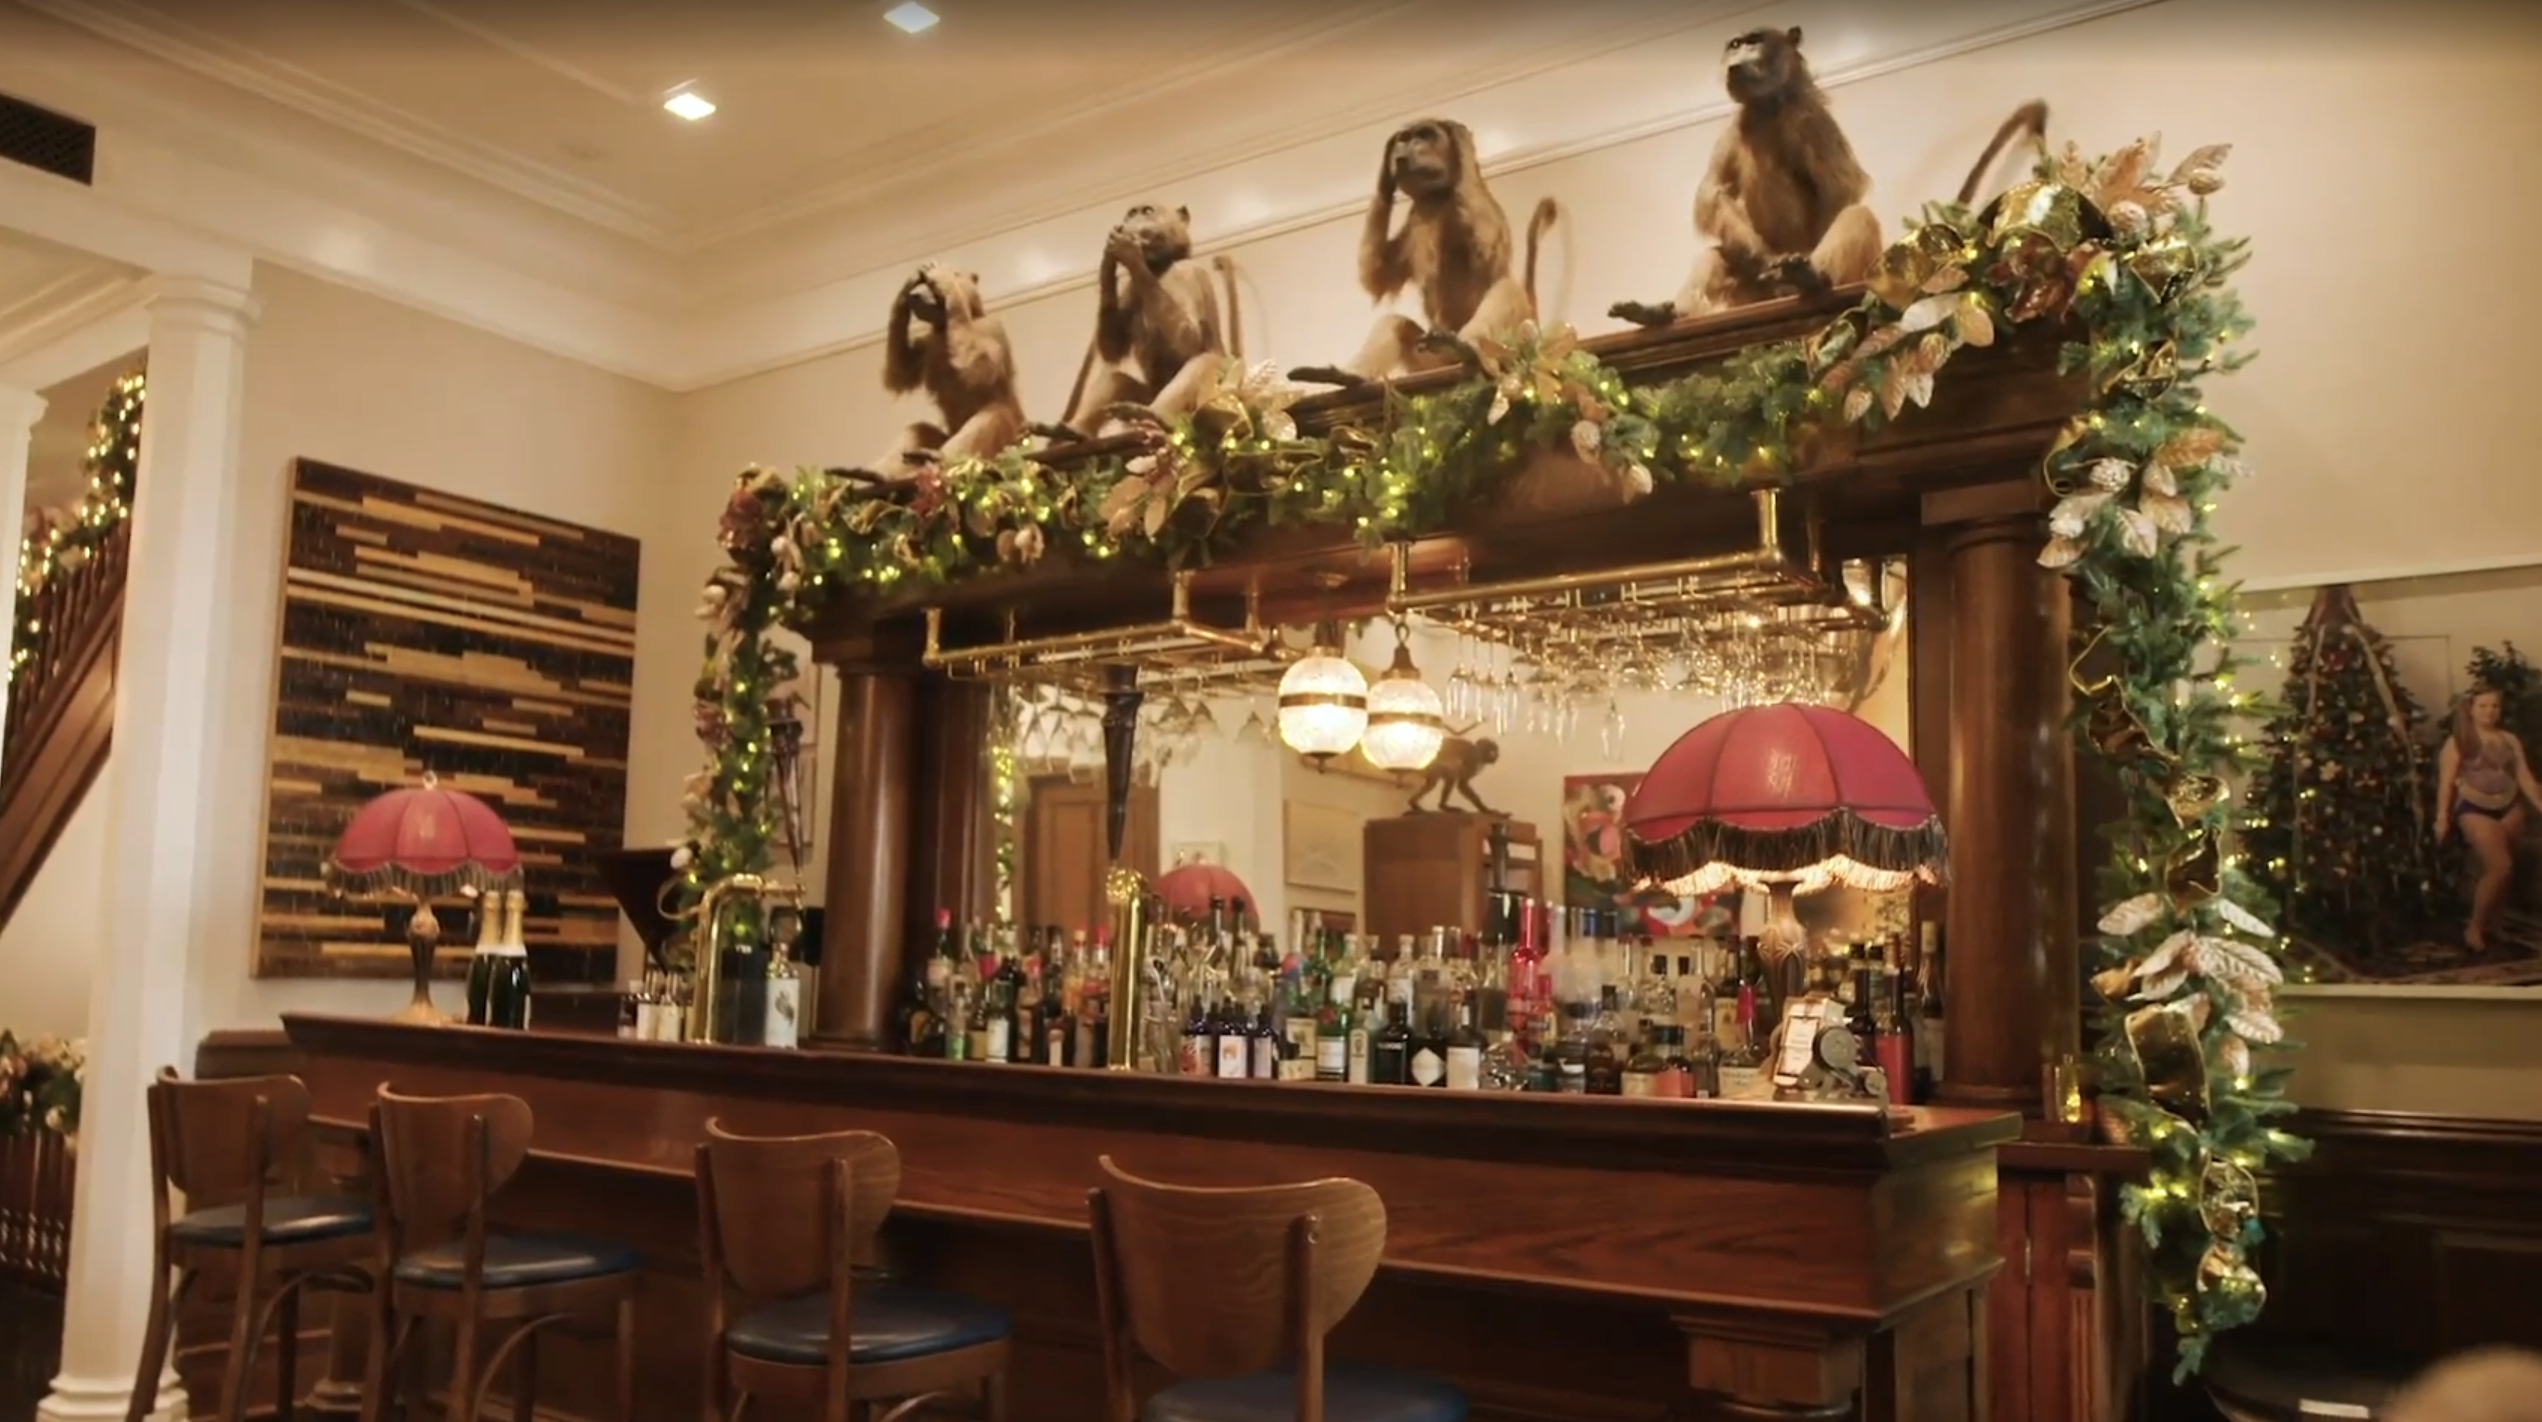 The monkey bar which features four taxidermied monkeys